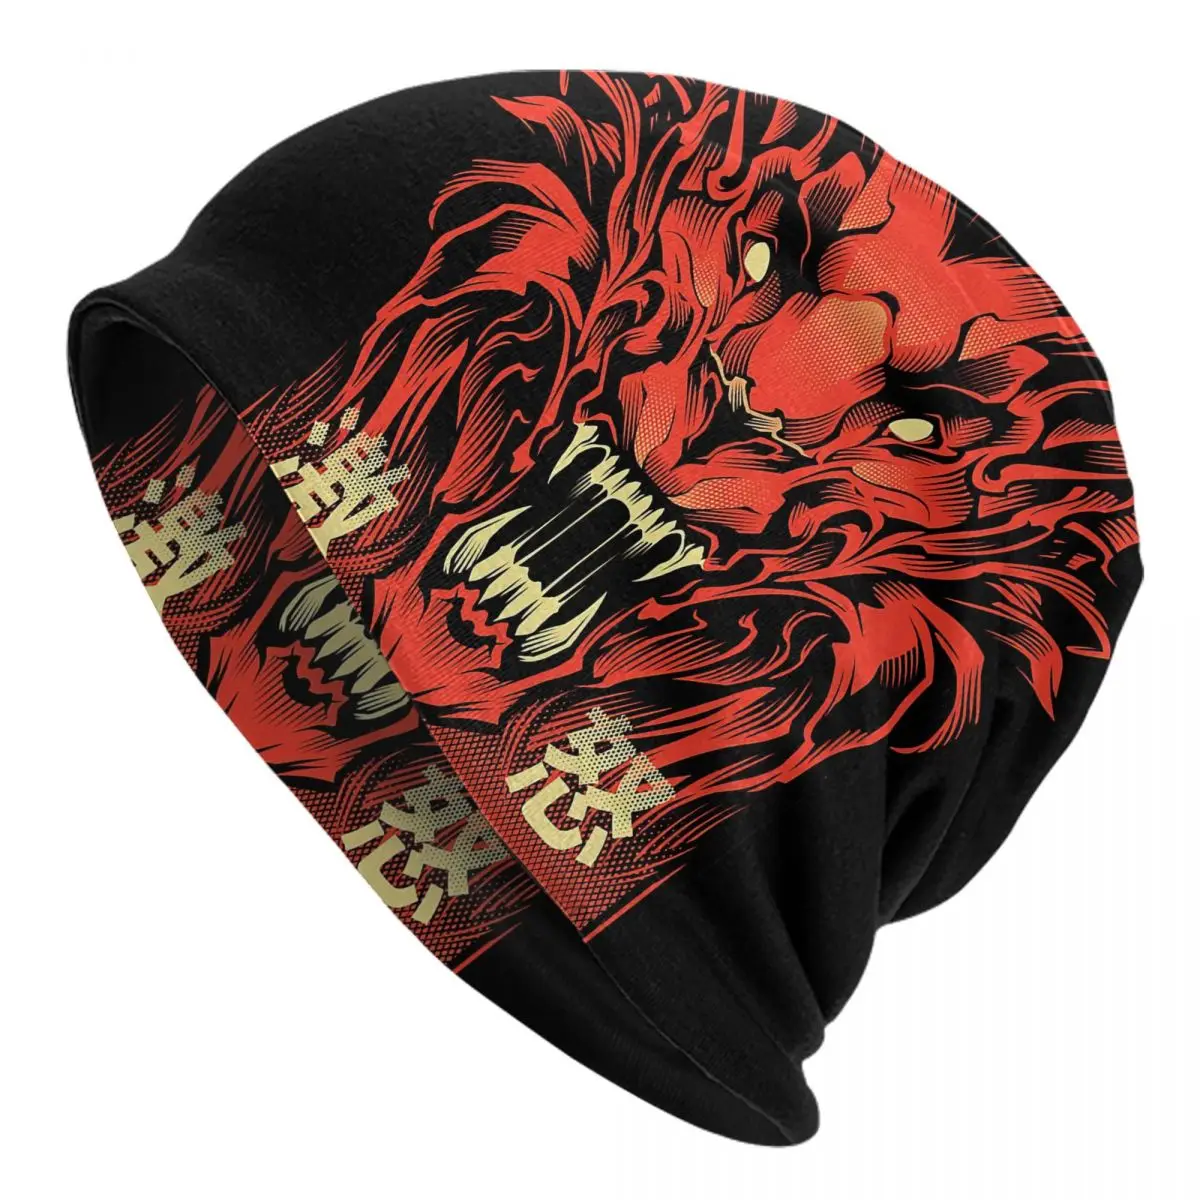 Rage Of The Lion Adult Men's Women's Knit Hat Keep warm winter Funny knitted hat